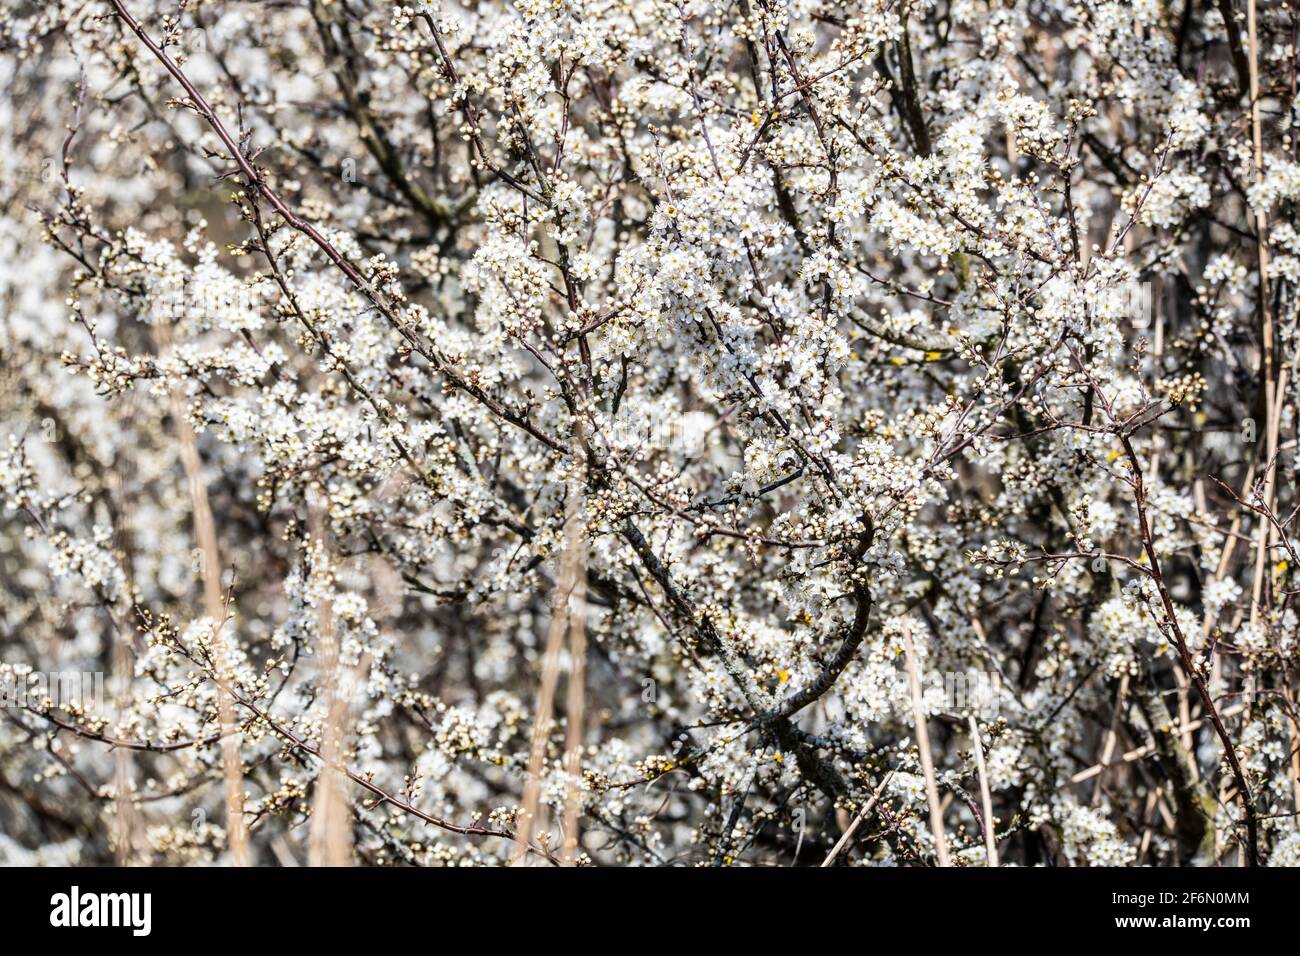 Blackthorn May in Springtime background poster Stock Photo